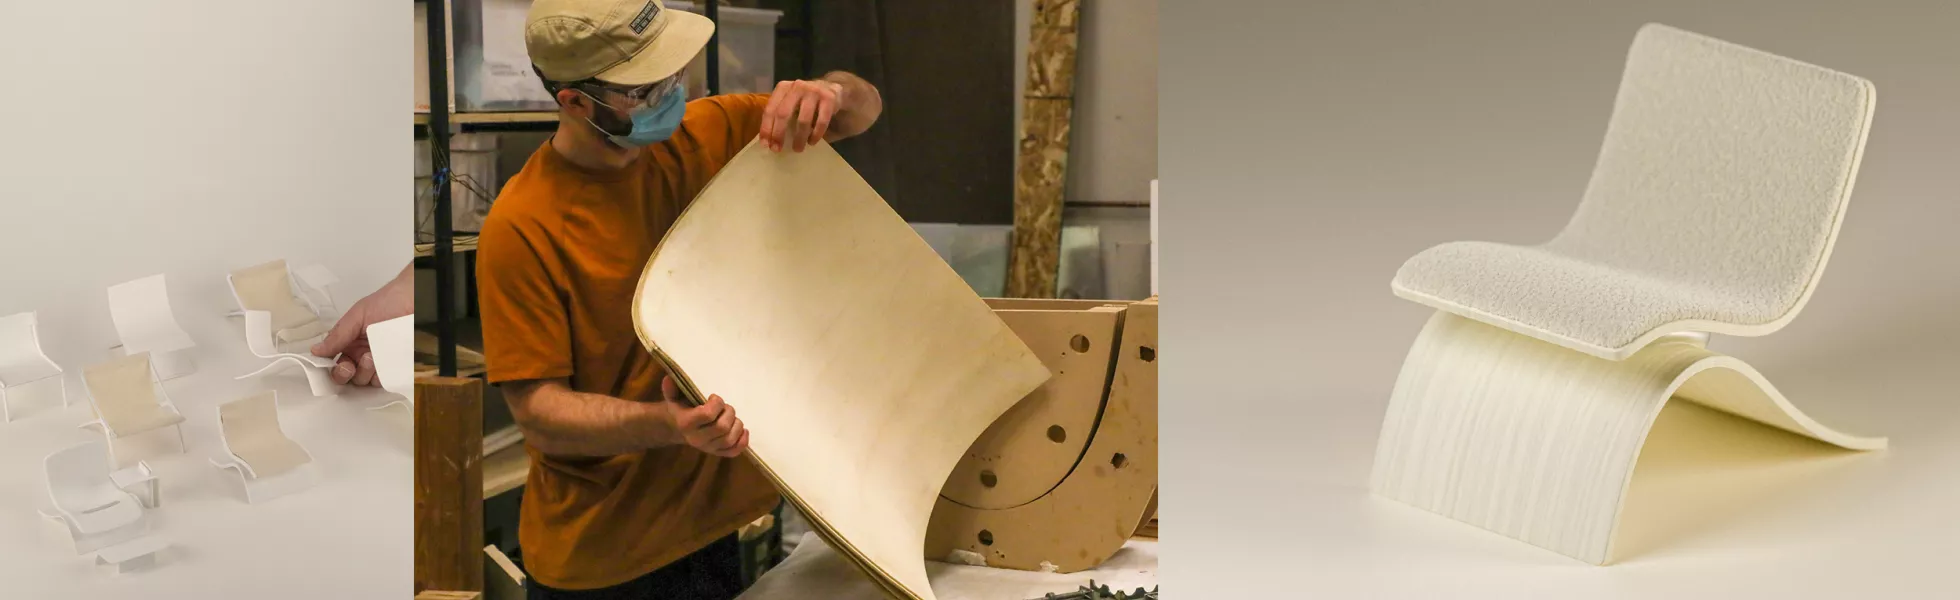 A student designing, prototyping, and building a modern bent plywood chair with upholstery.